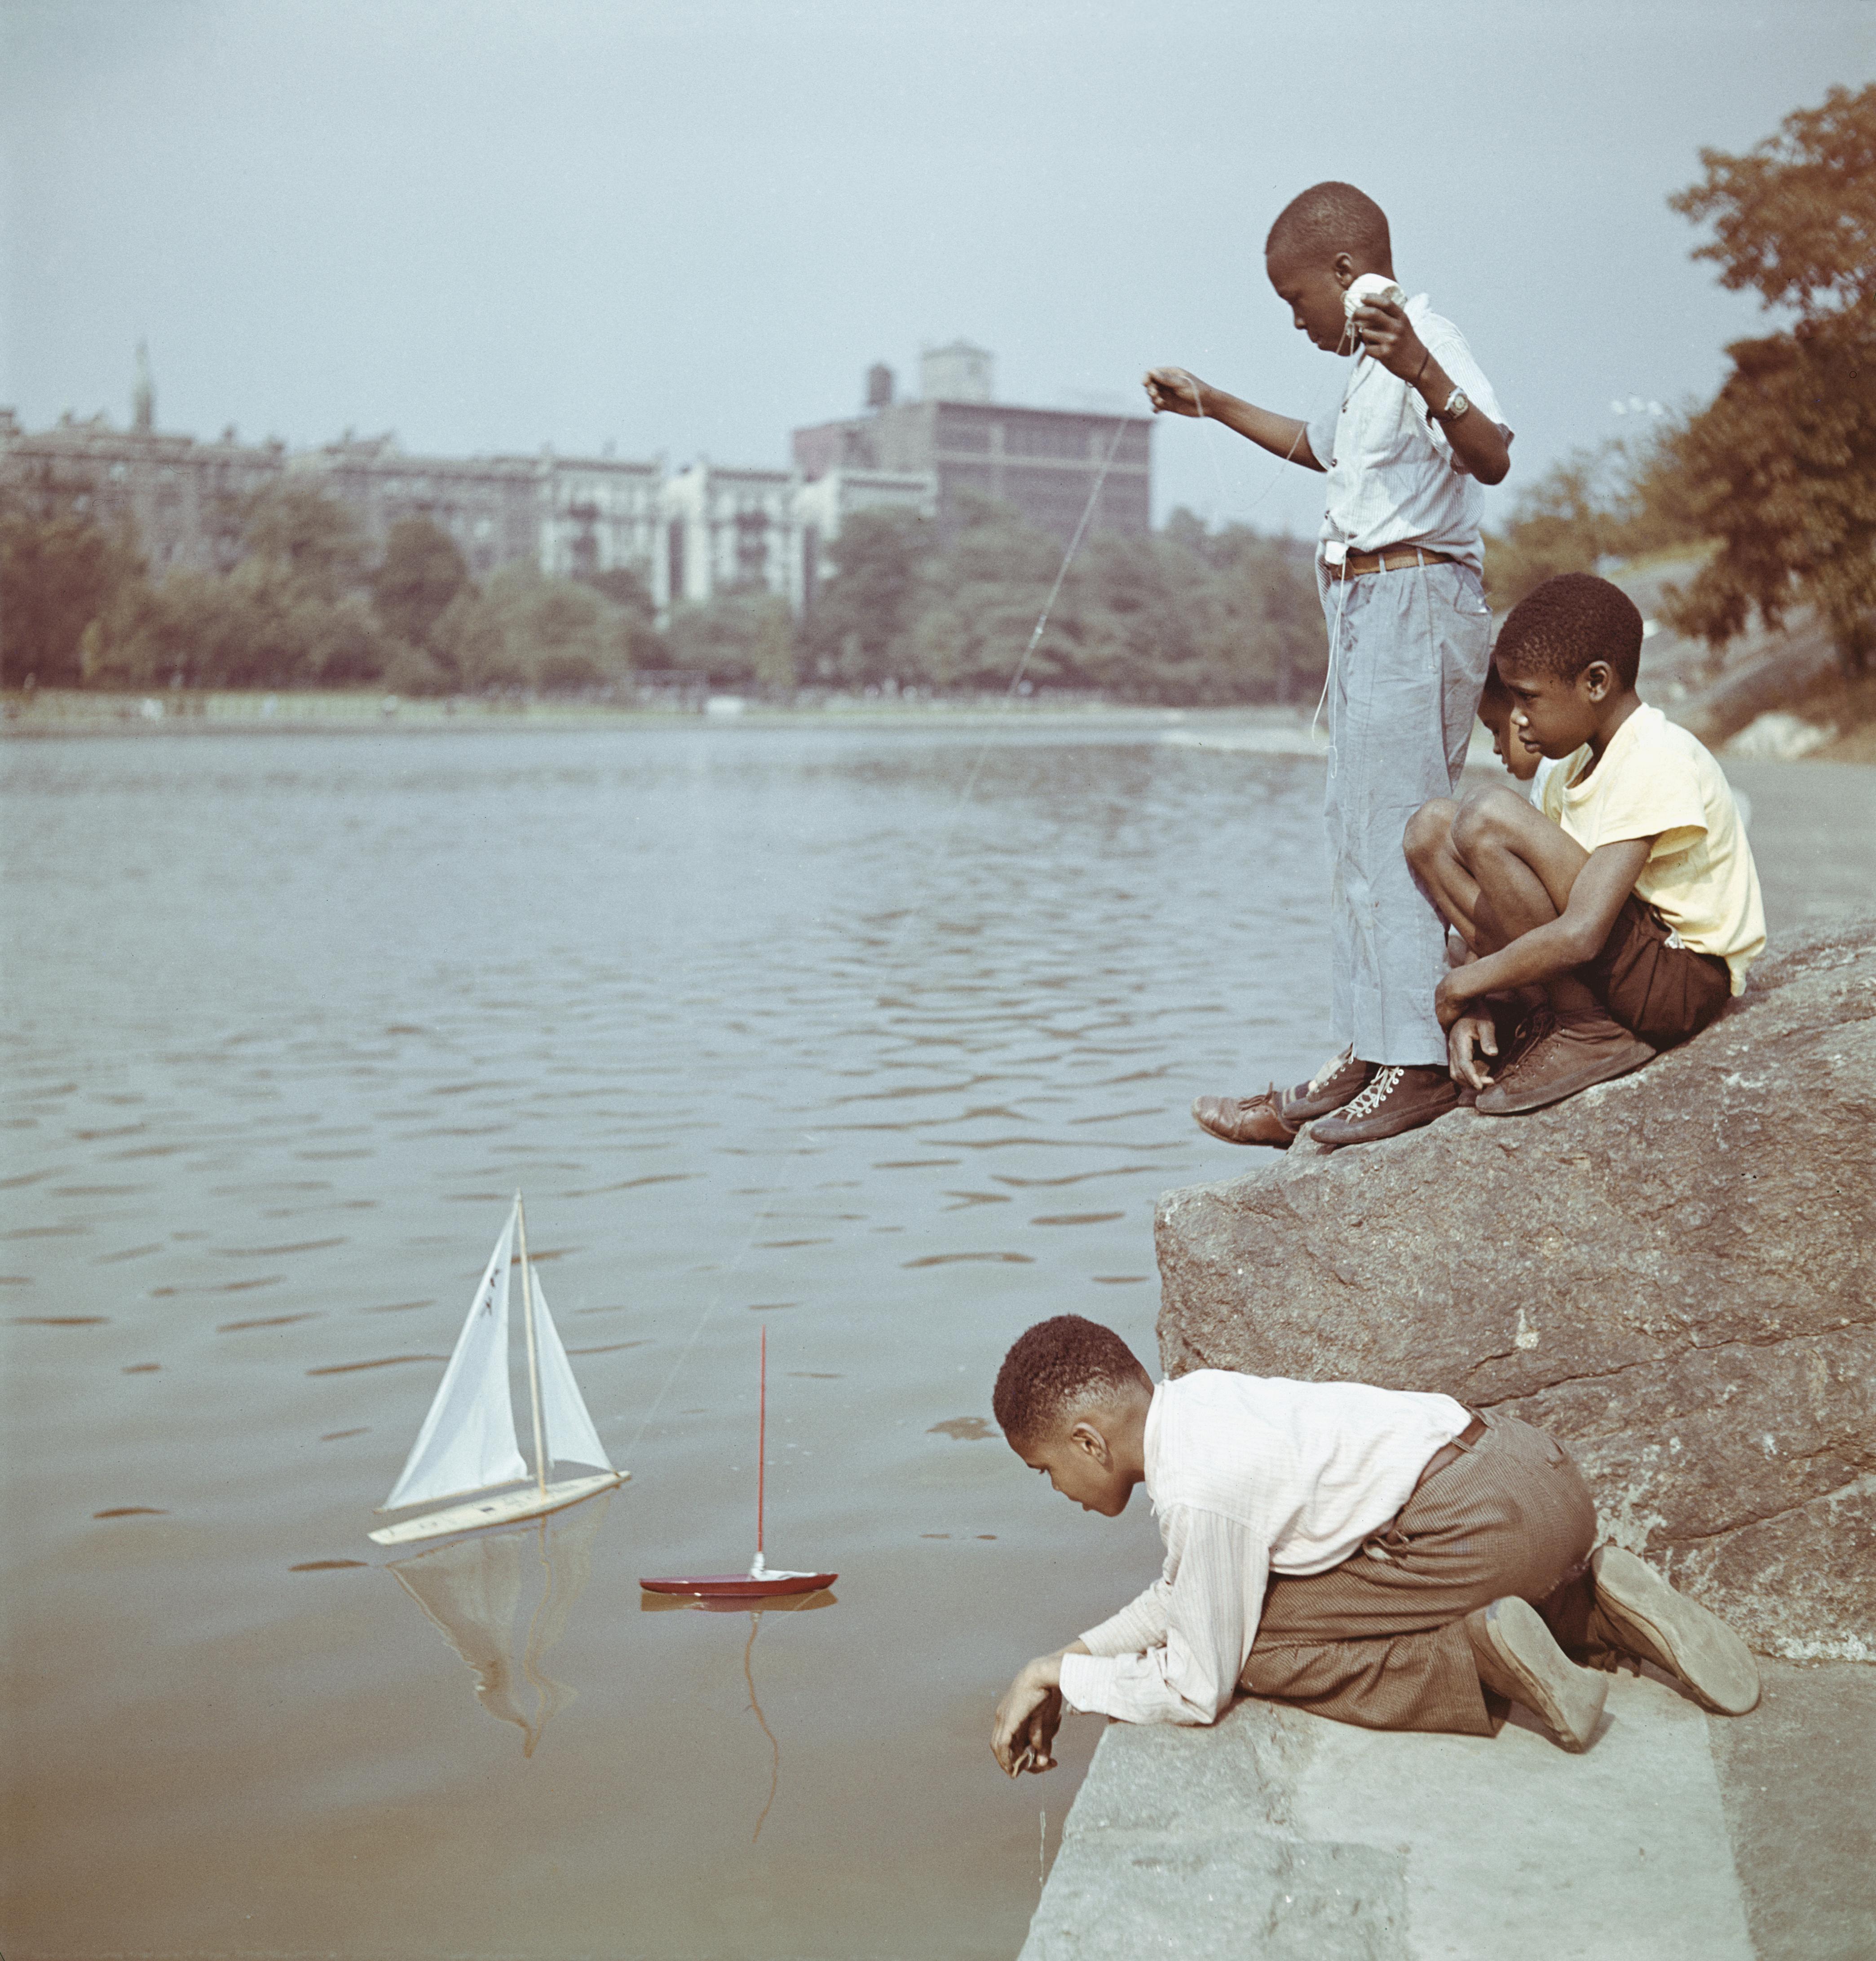 Slim Aarons Portrait Photograph - Model Boat Sailing in Central Park NYC, Estate Edition Photograph, Children Play